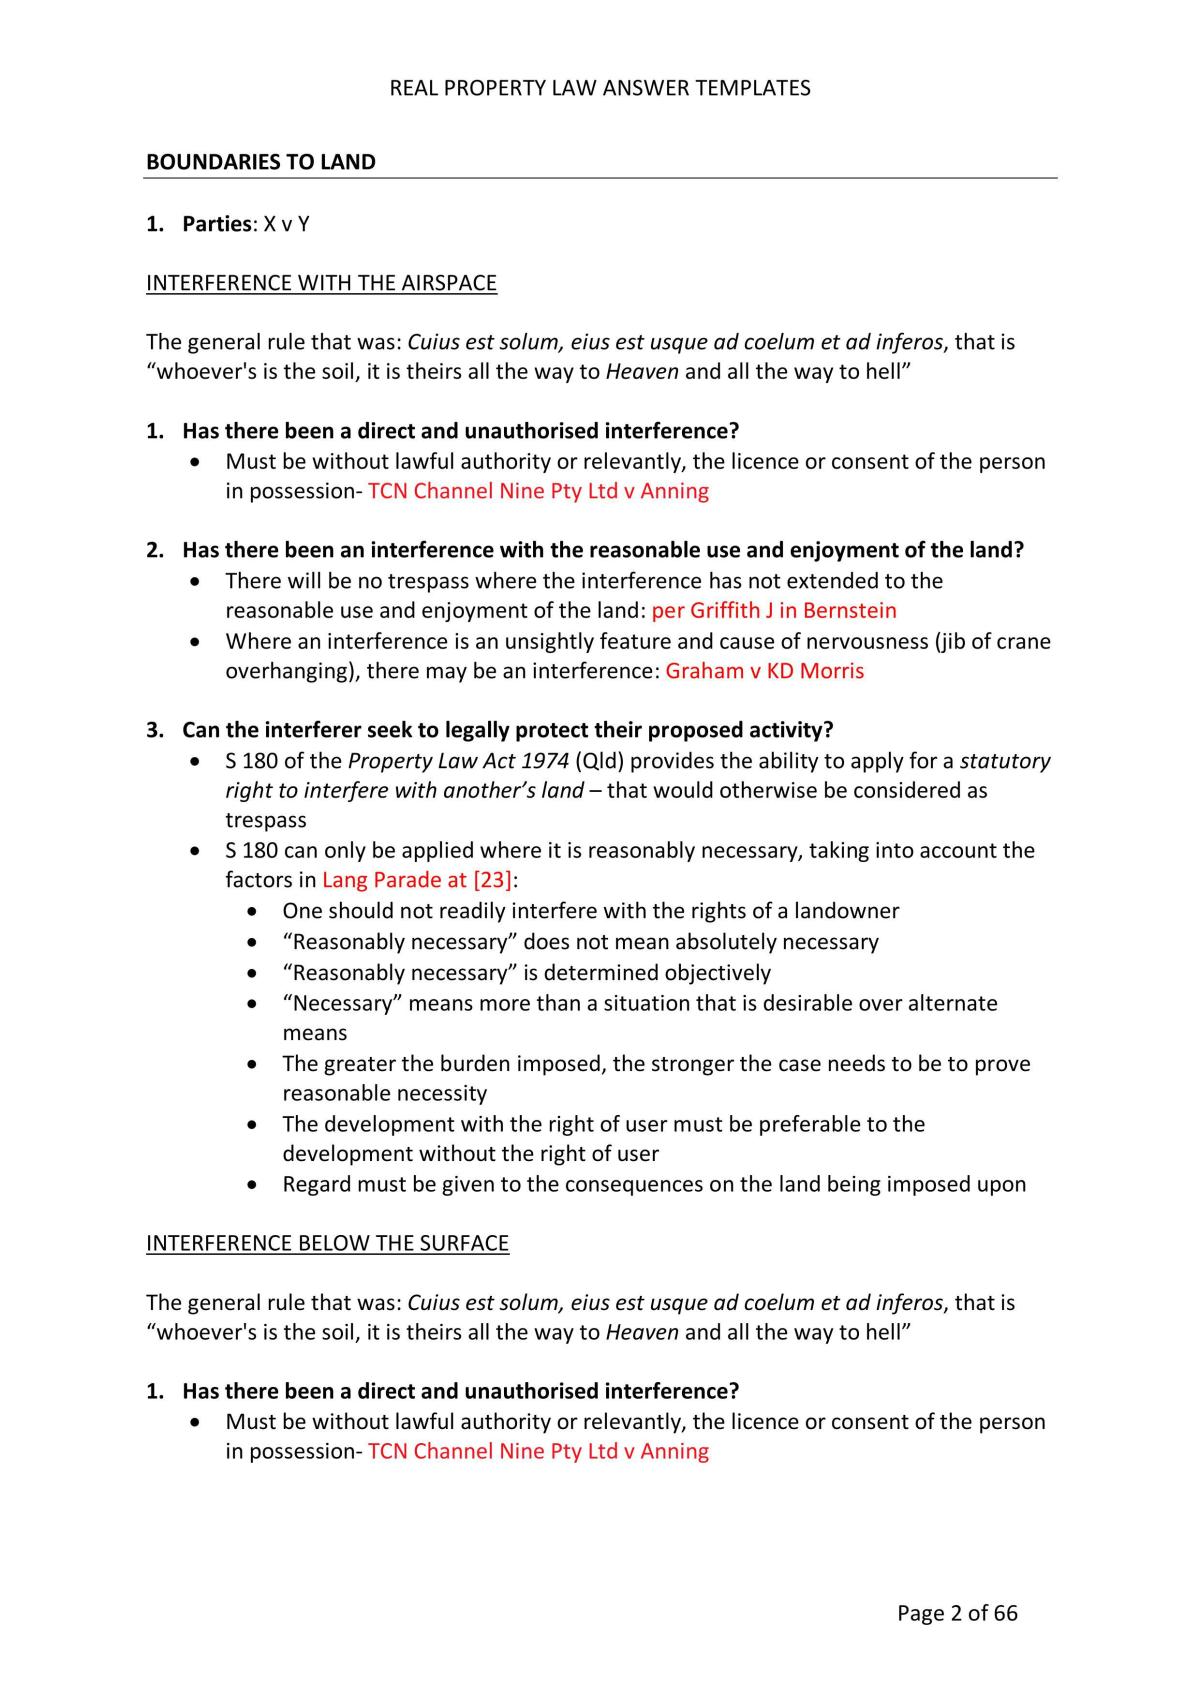 Real Property Law Notes - Page 2